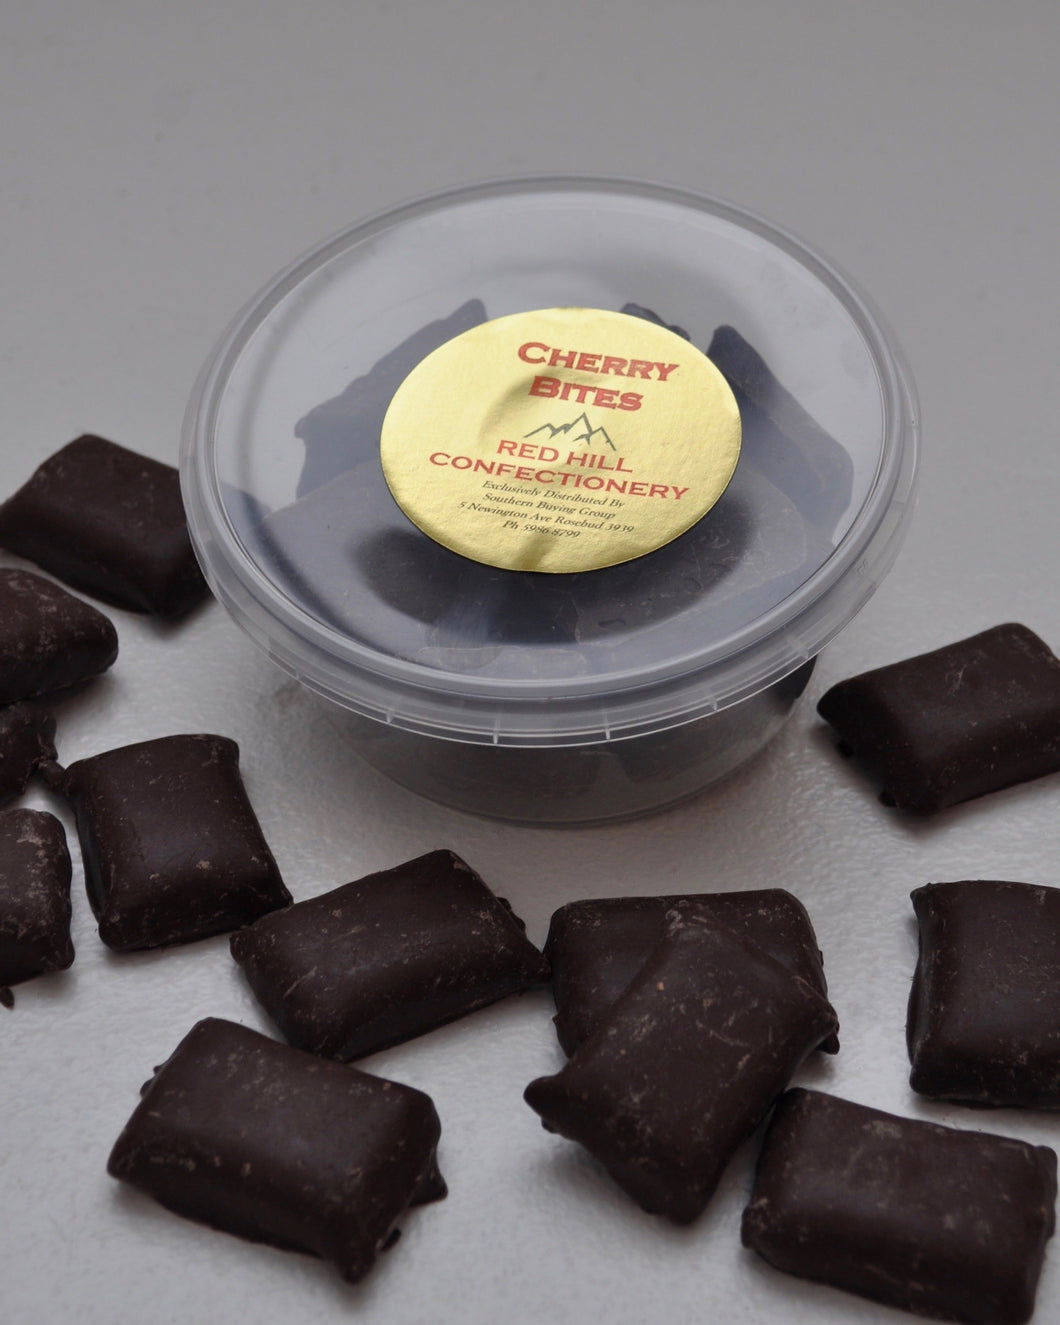 Red Hill Confectionery - Chocolate Cherry Bites 200g Tub